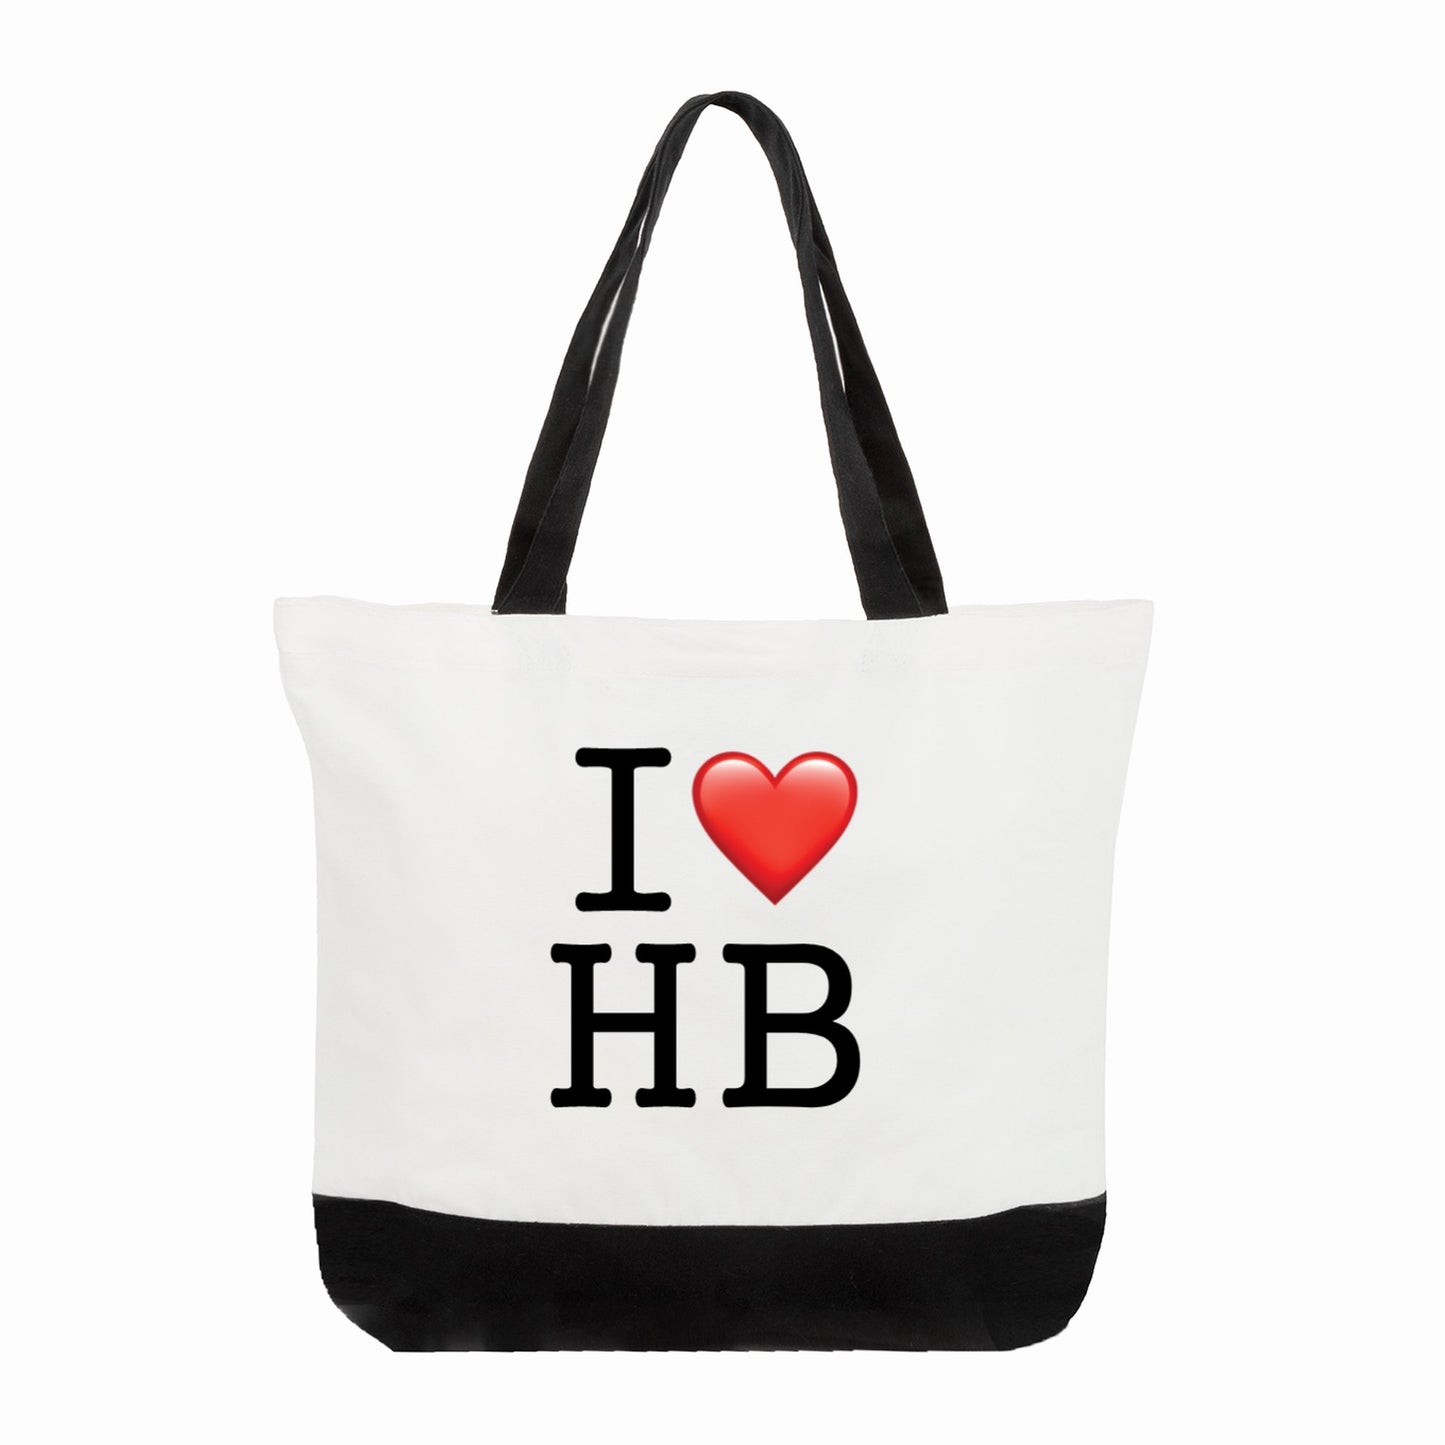 Tote Bag: Day 01 of 30 - Hermosa Beach Pier Plaza